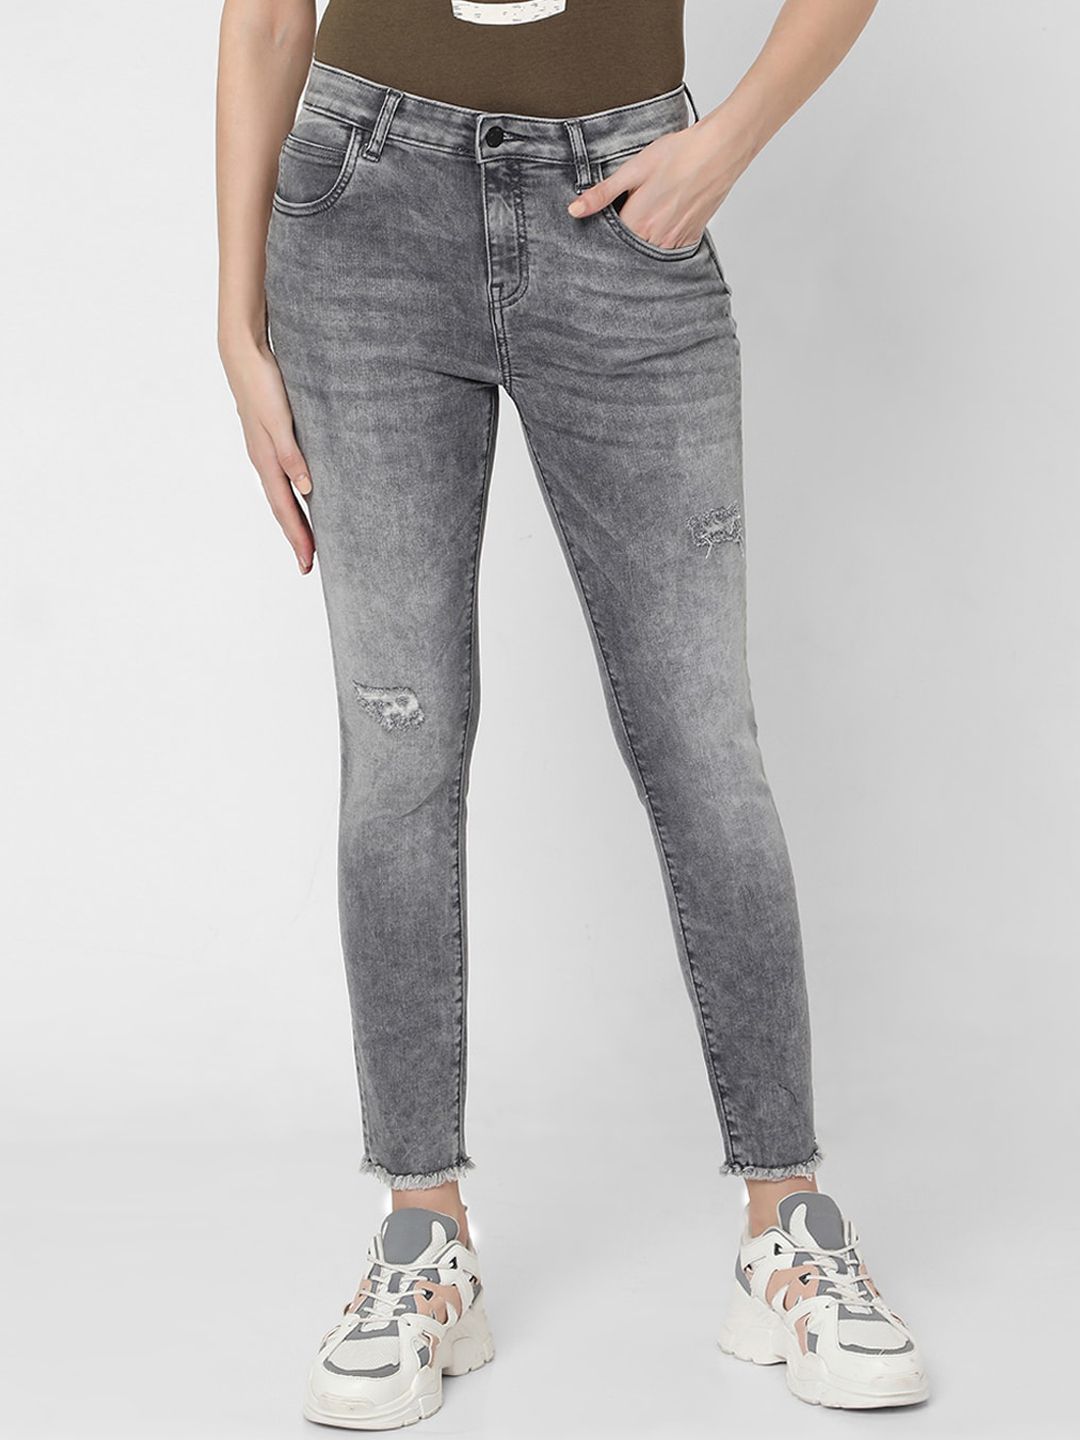 Vero Moda Women Grey Skinny Fit High-Rise Mildly Distressed Heavy Fade Jeans Price in India